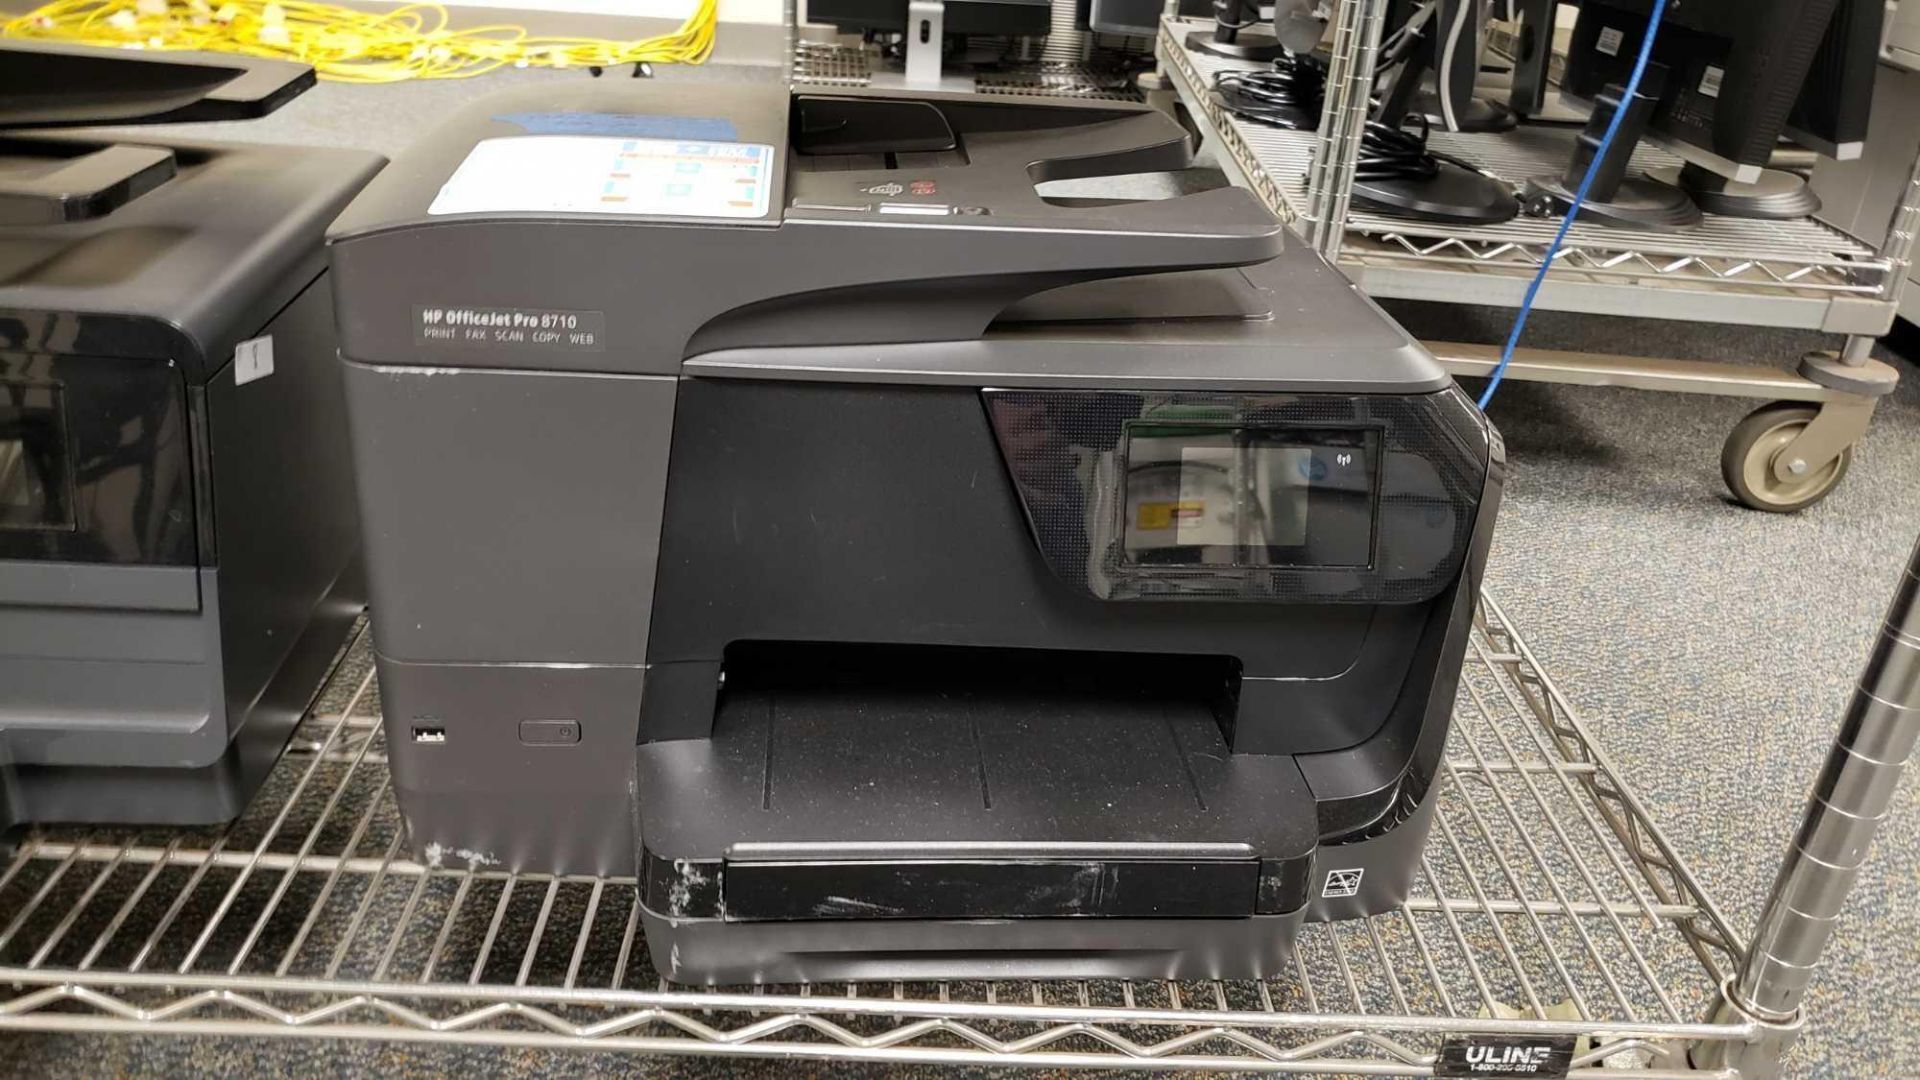 Lot of (3) HP Printers to include (2) HP Officejet Pro 8710 and (1) HP Officejet Pro 8610 - Image 2 of 4